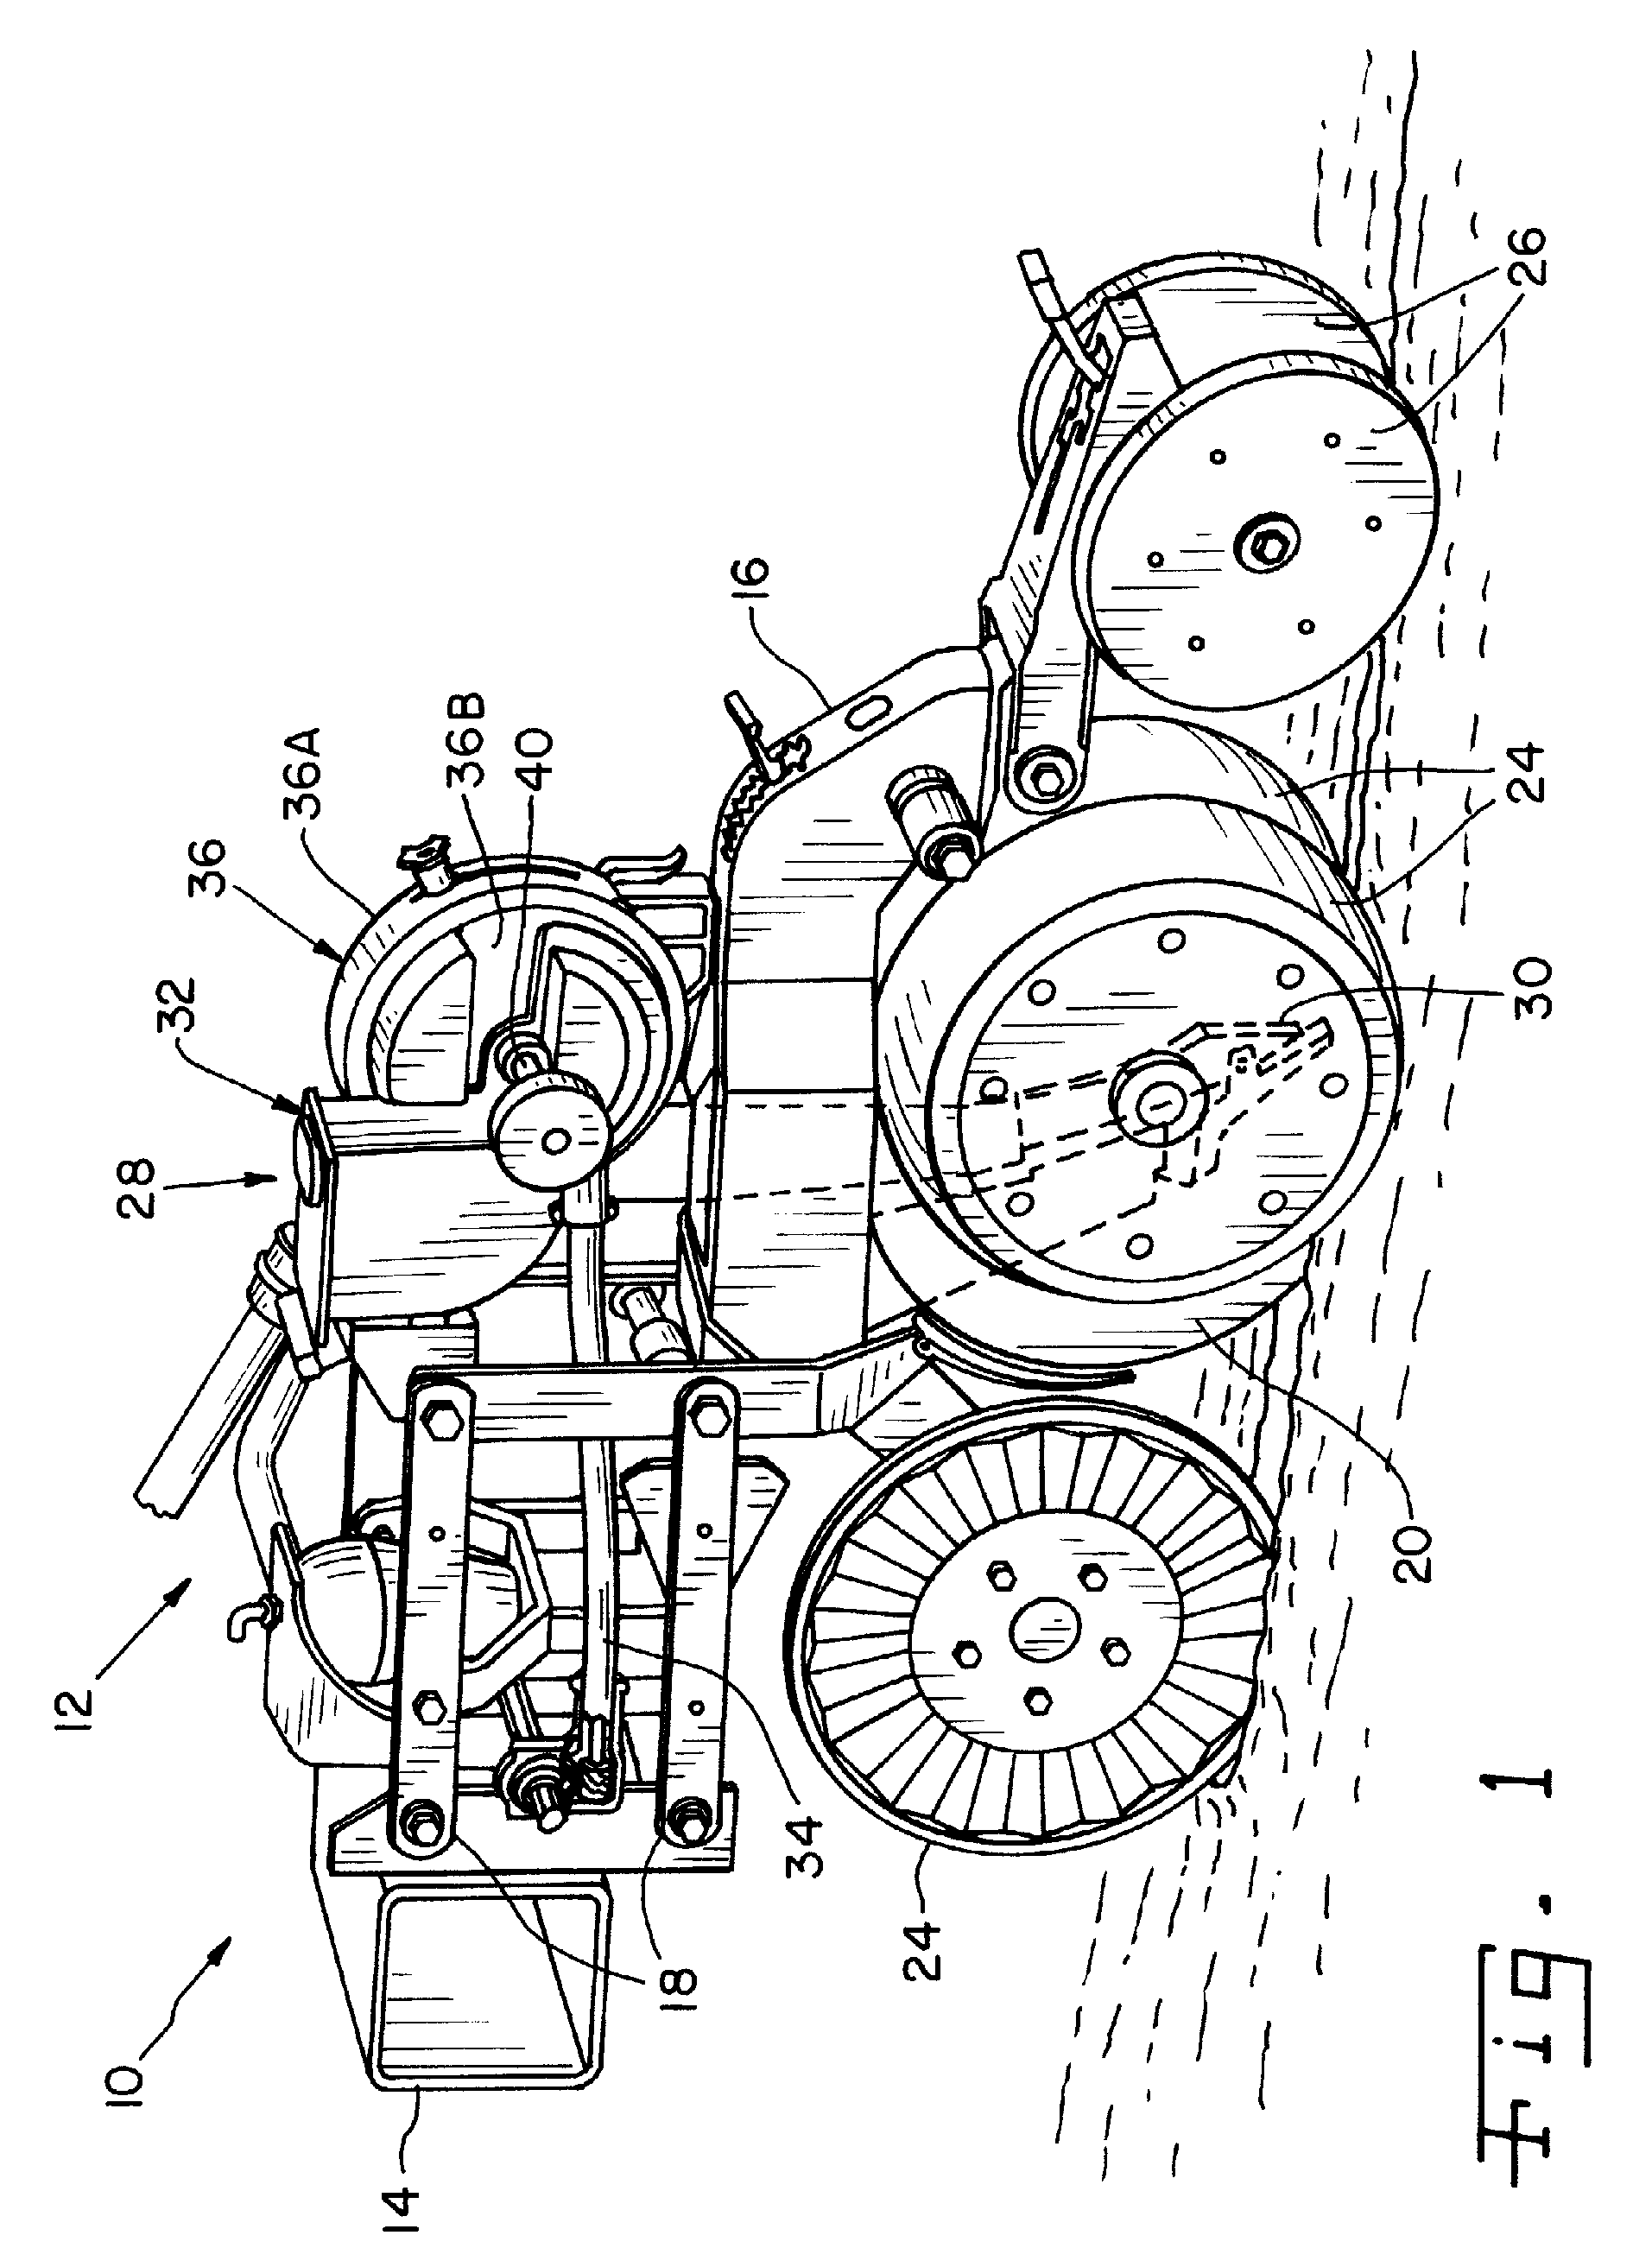 Seed meter with flexible seed disc